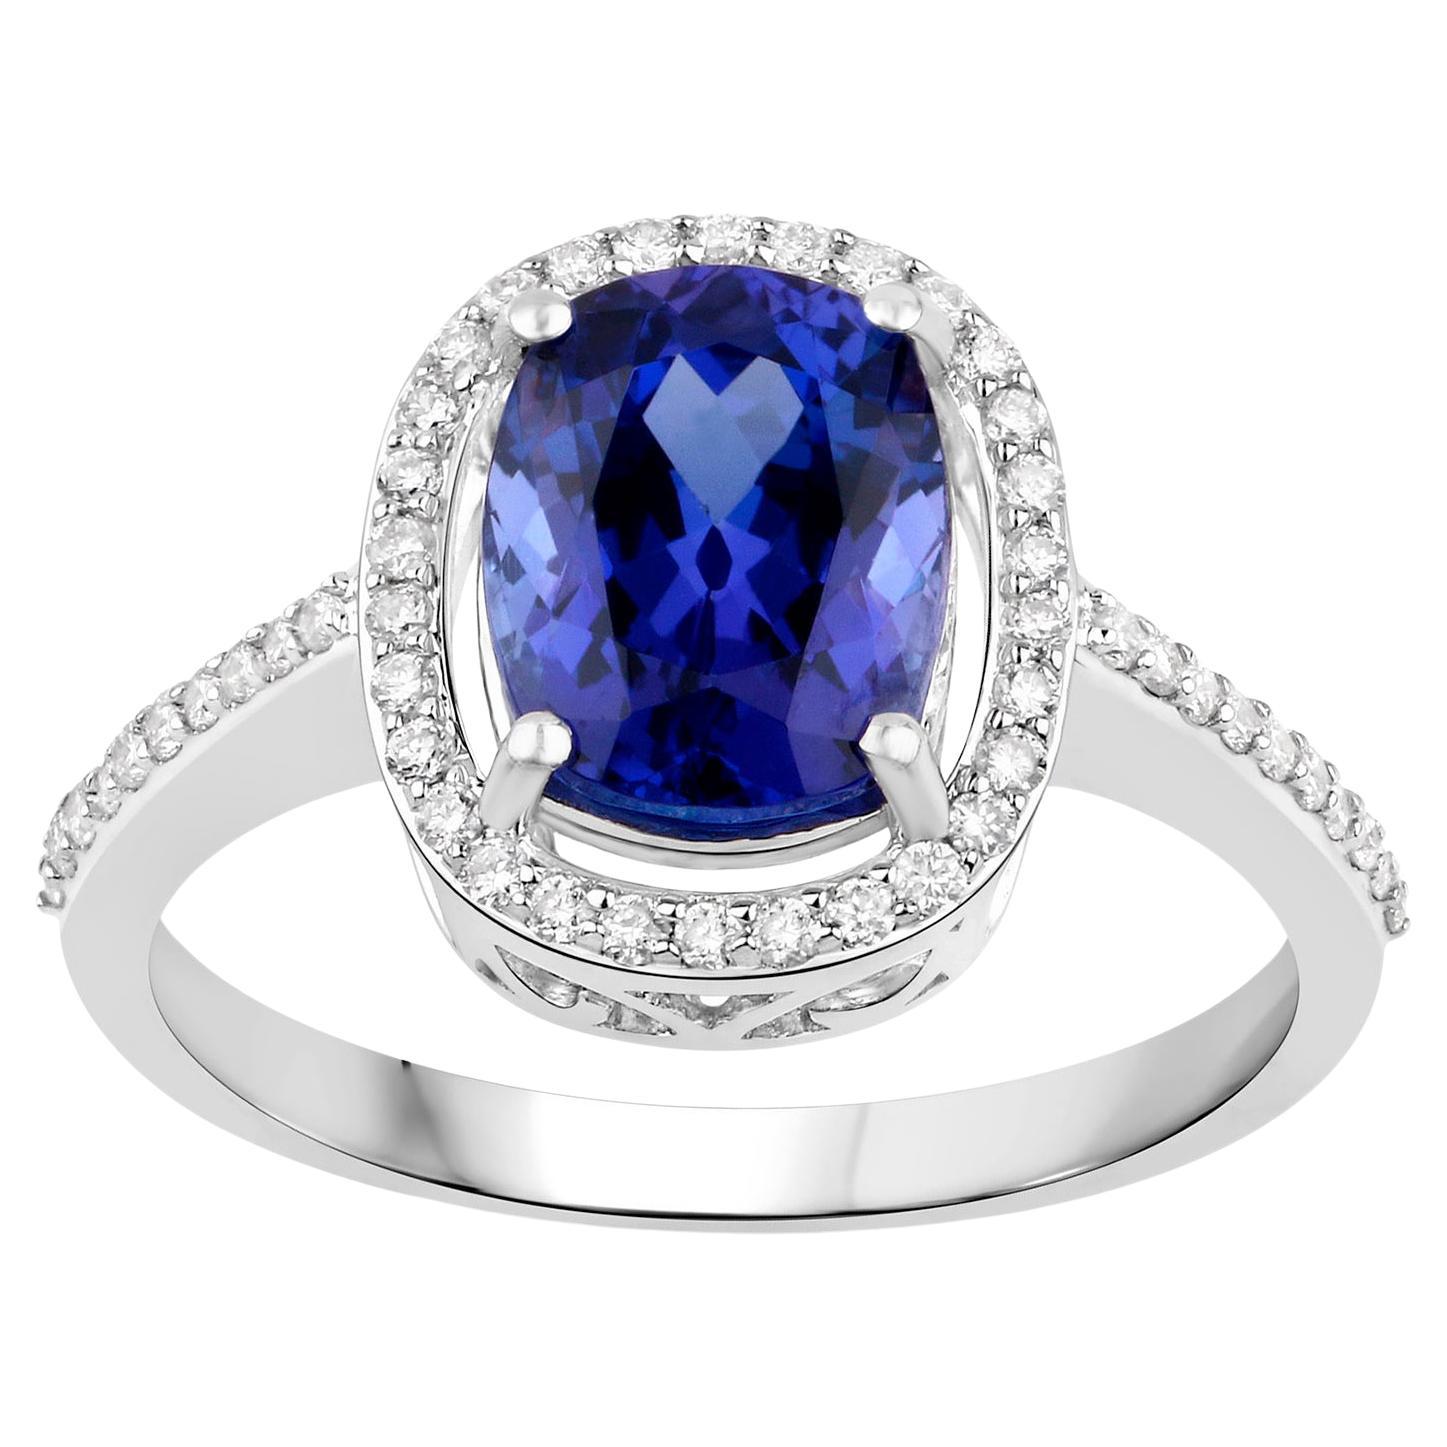 Cushion Tanzanite Ring With Diamonds 2.65 Carats 14K White Gold For Sale